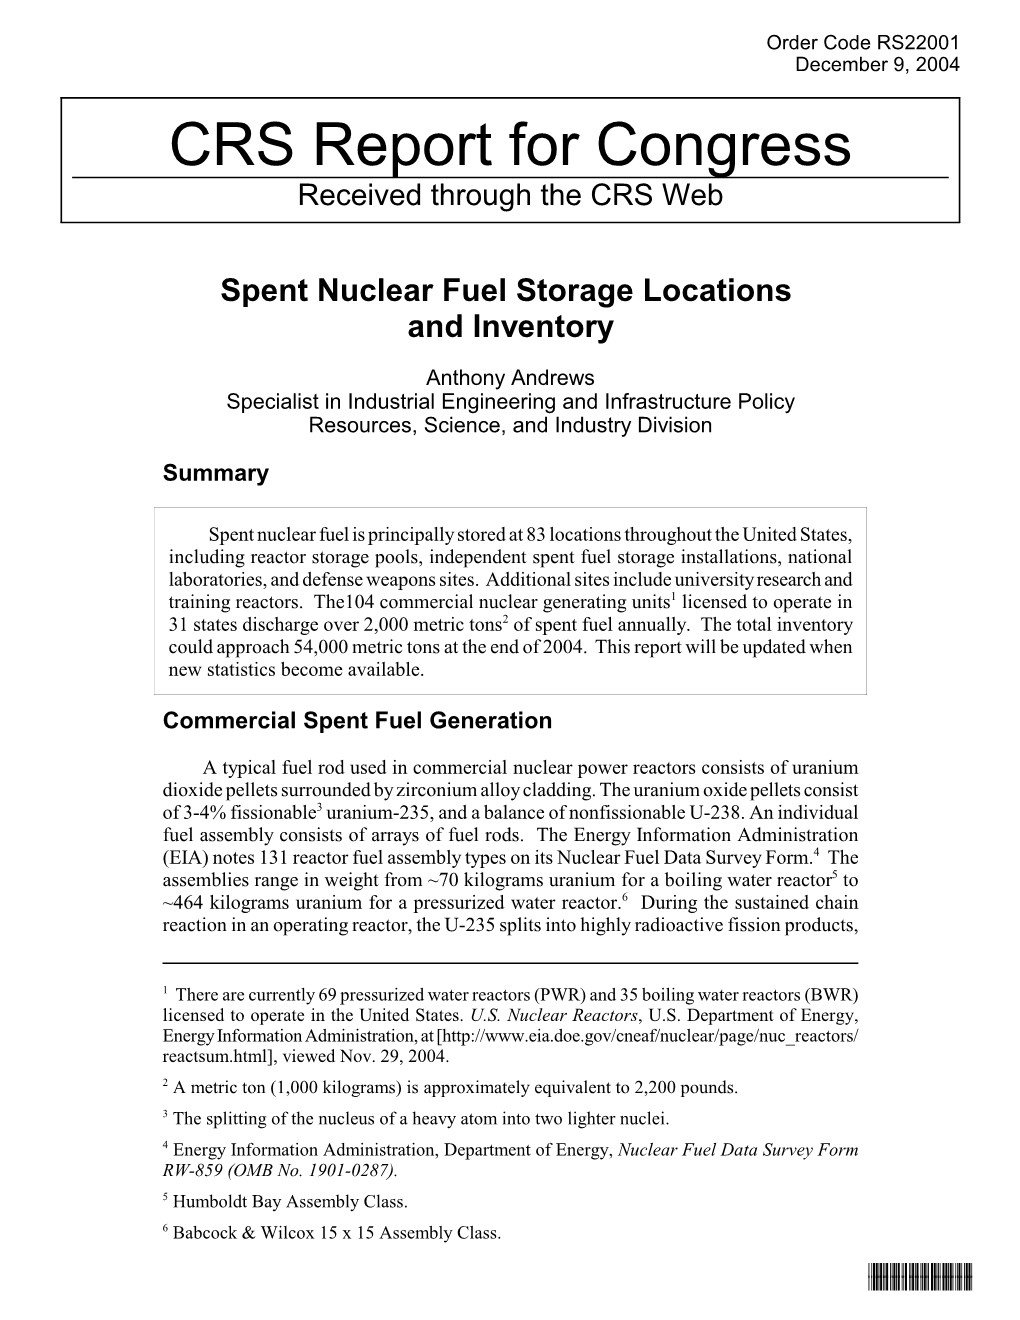 CRS Report for Congress Received Through the CRS Web